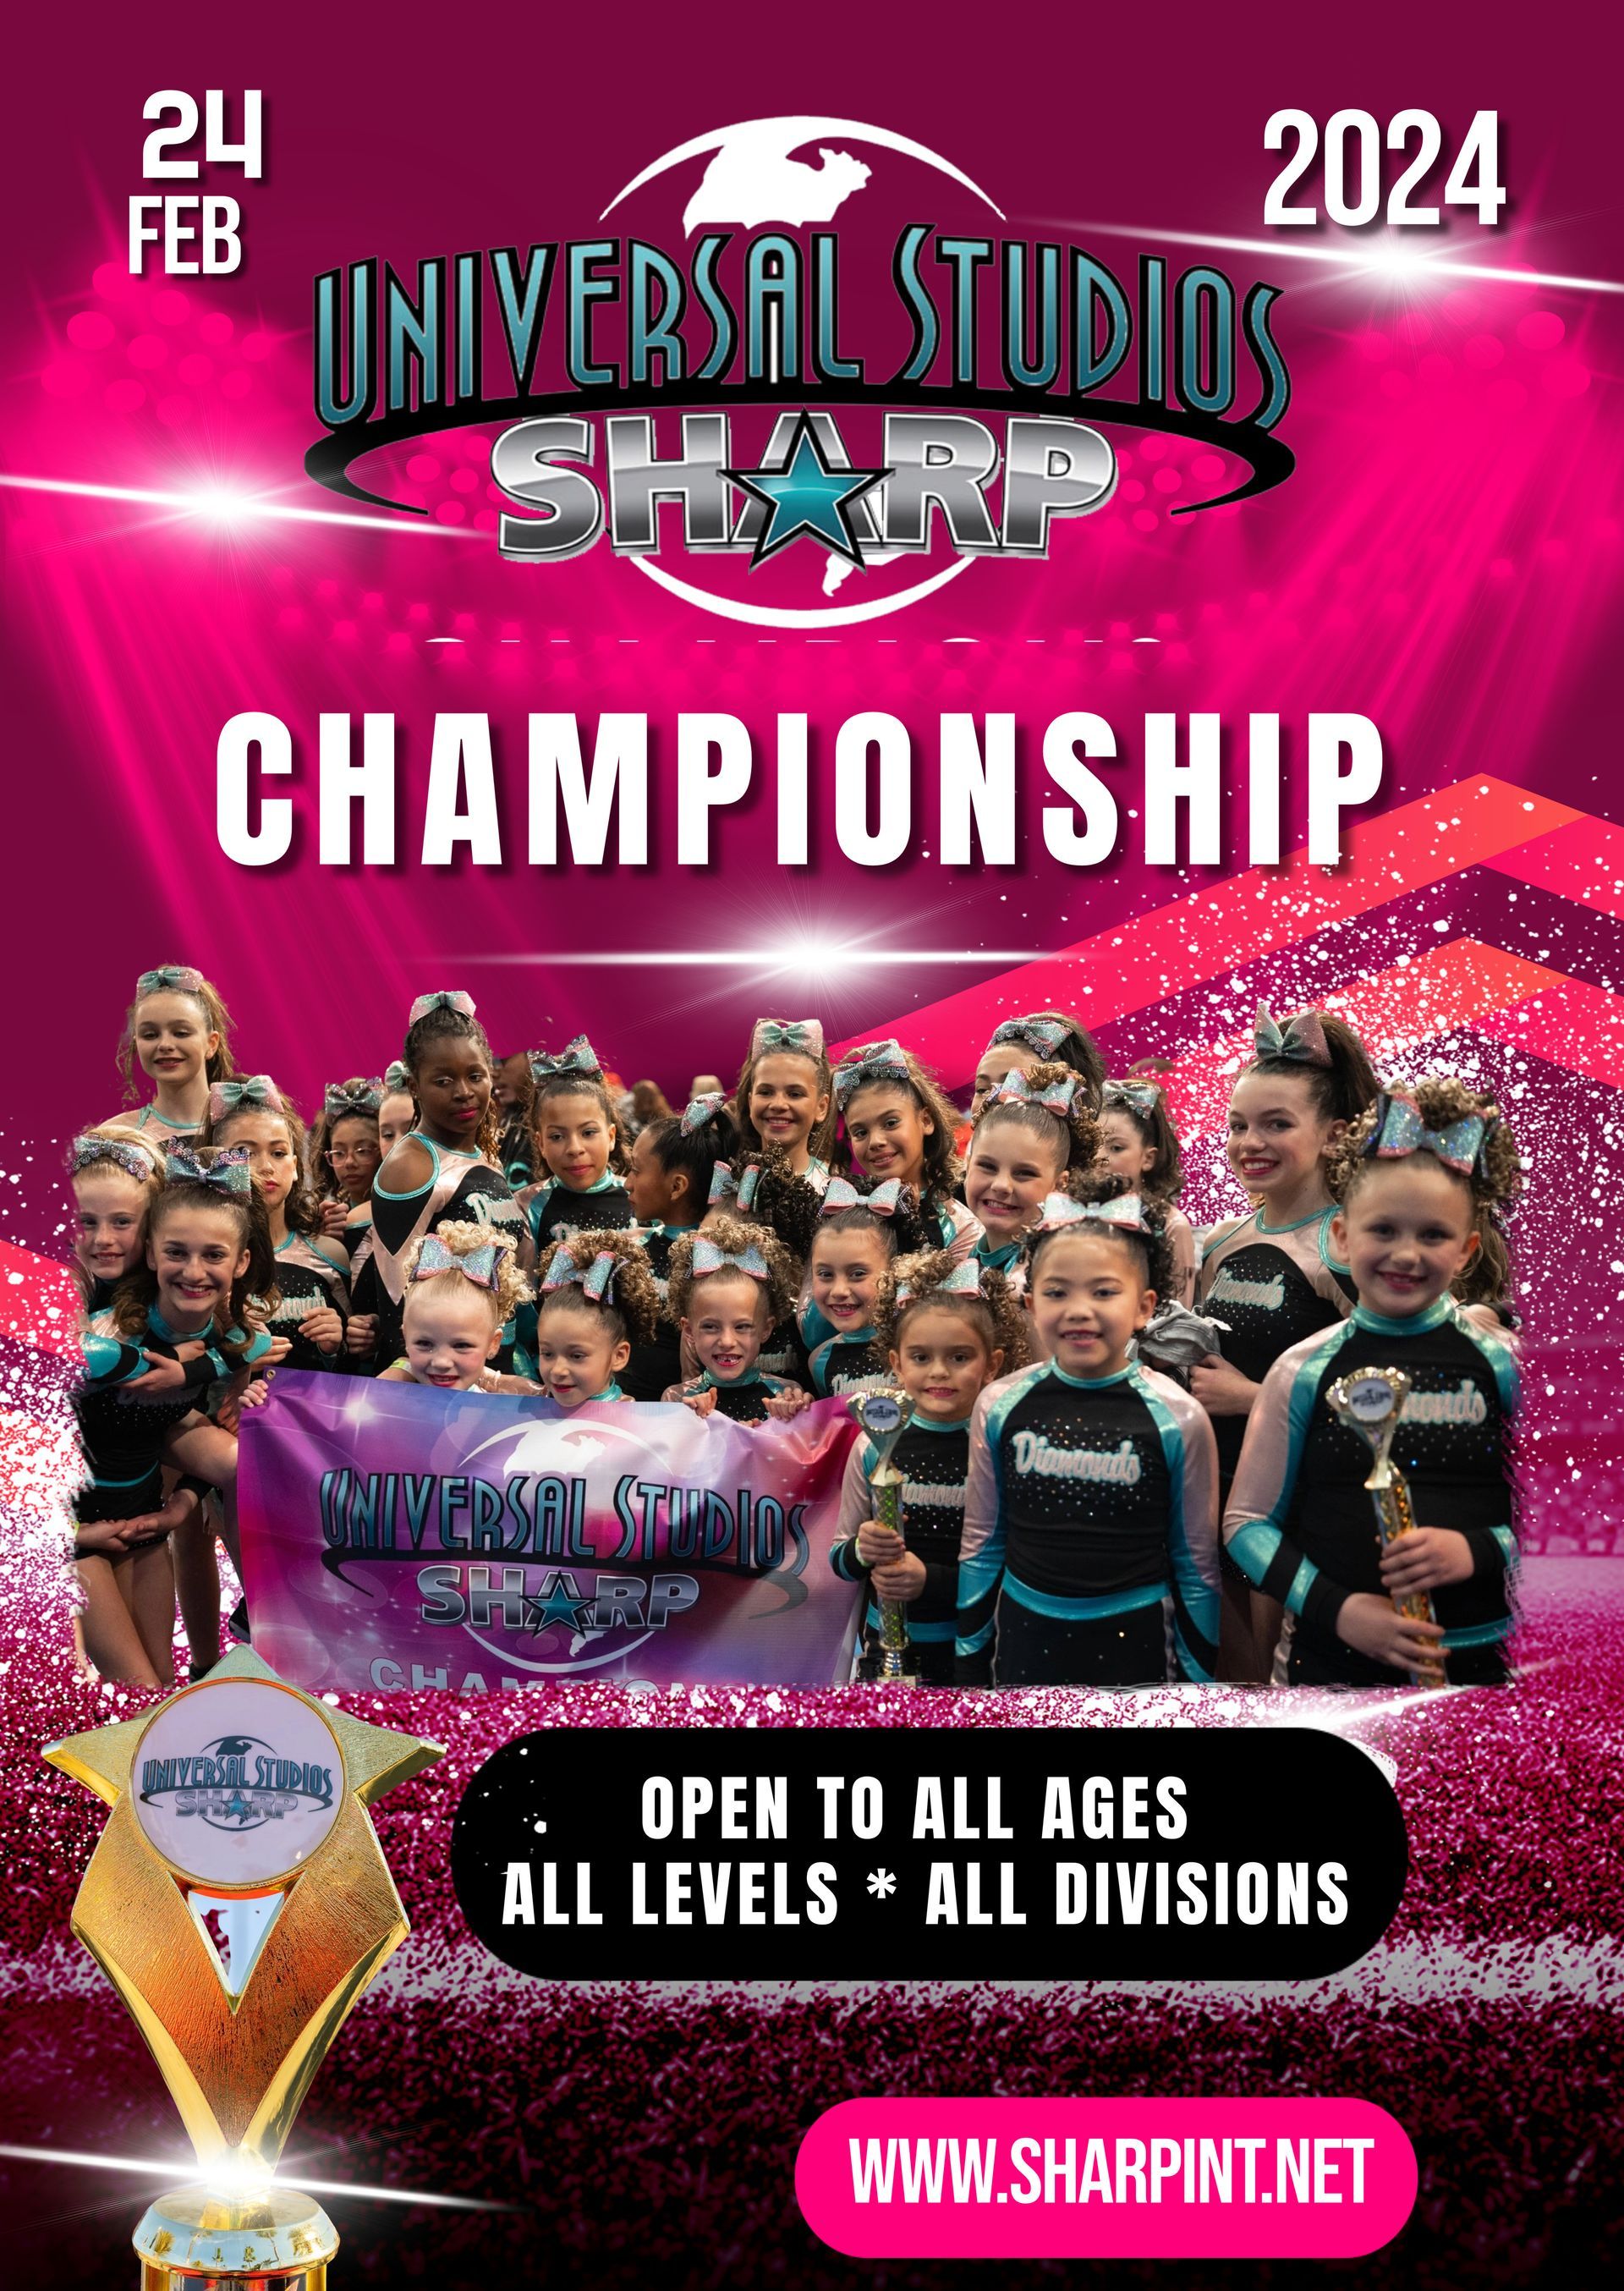 SHARP International Cheer & Dance Competitions & Camps